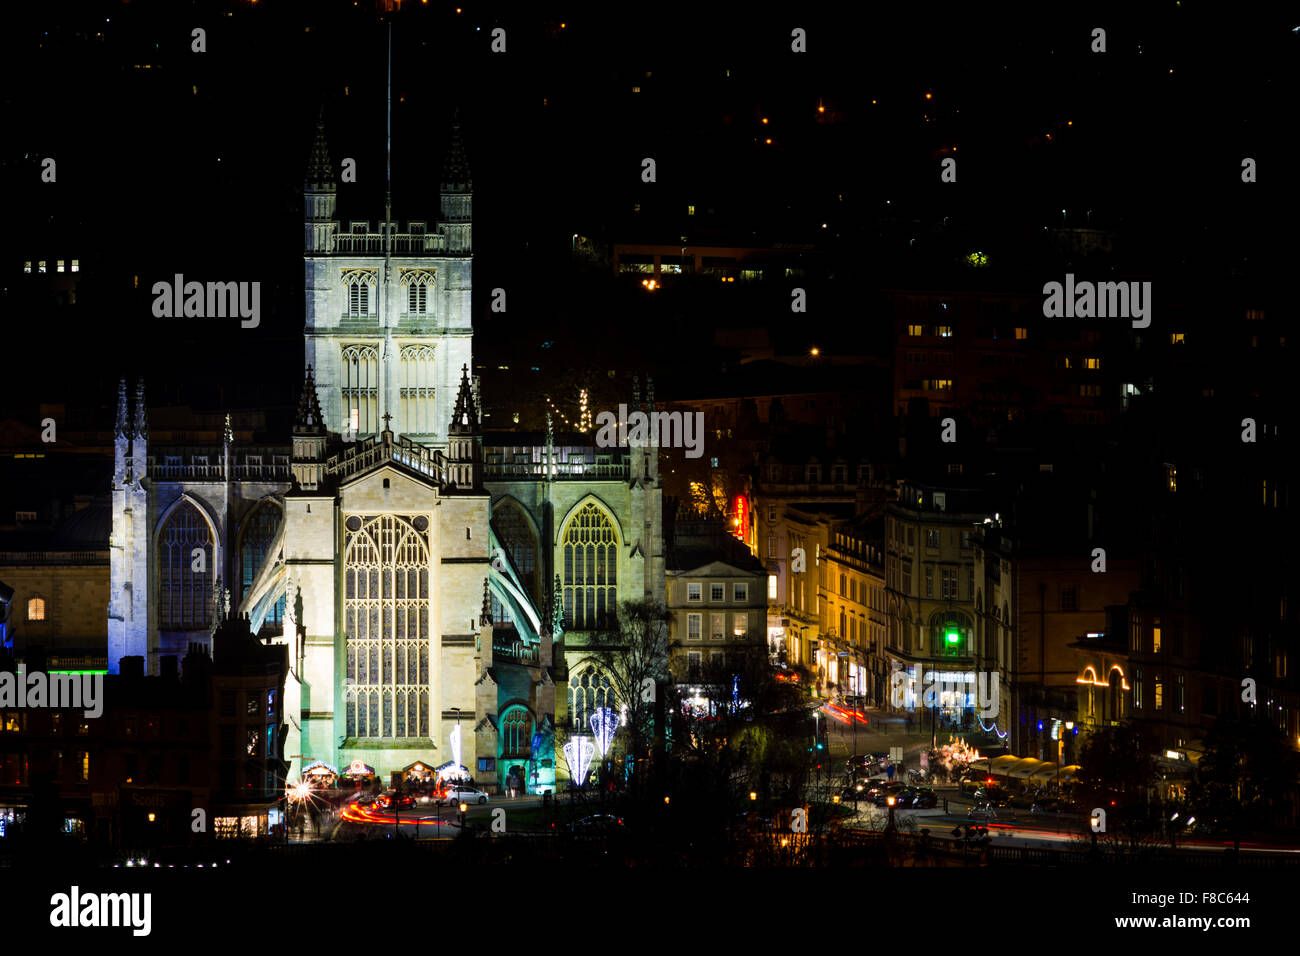 View of Bath Abbey at night from hills above the UNESCO World Heritage City of Bath, with Christmas market Stock Photo